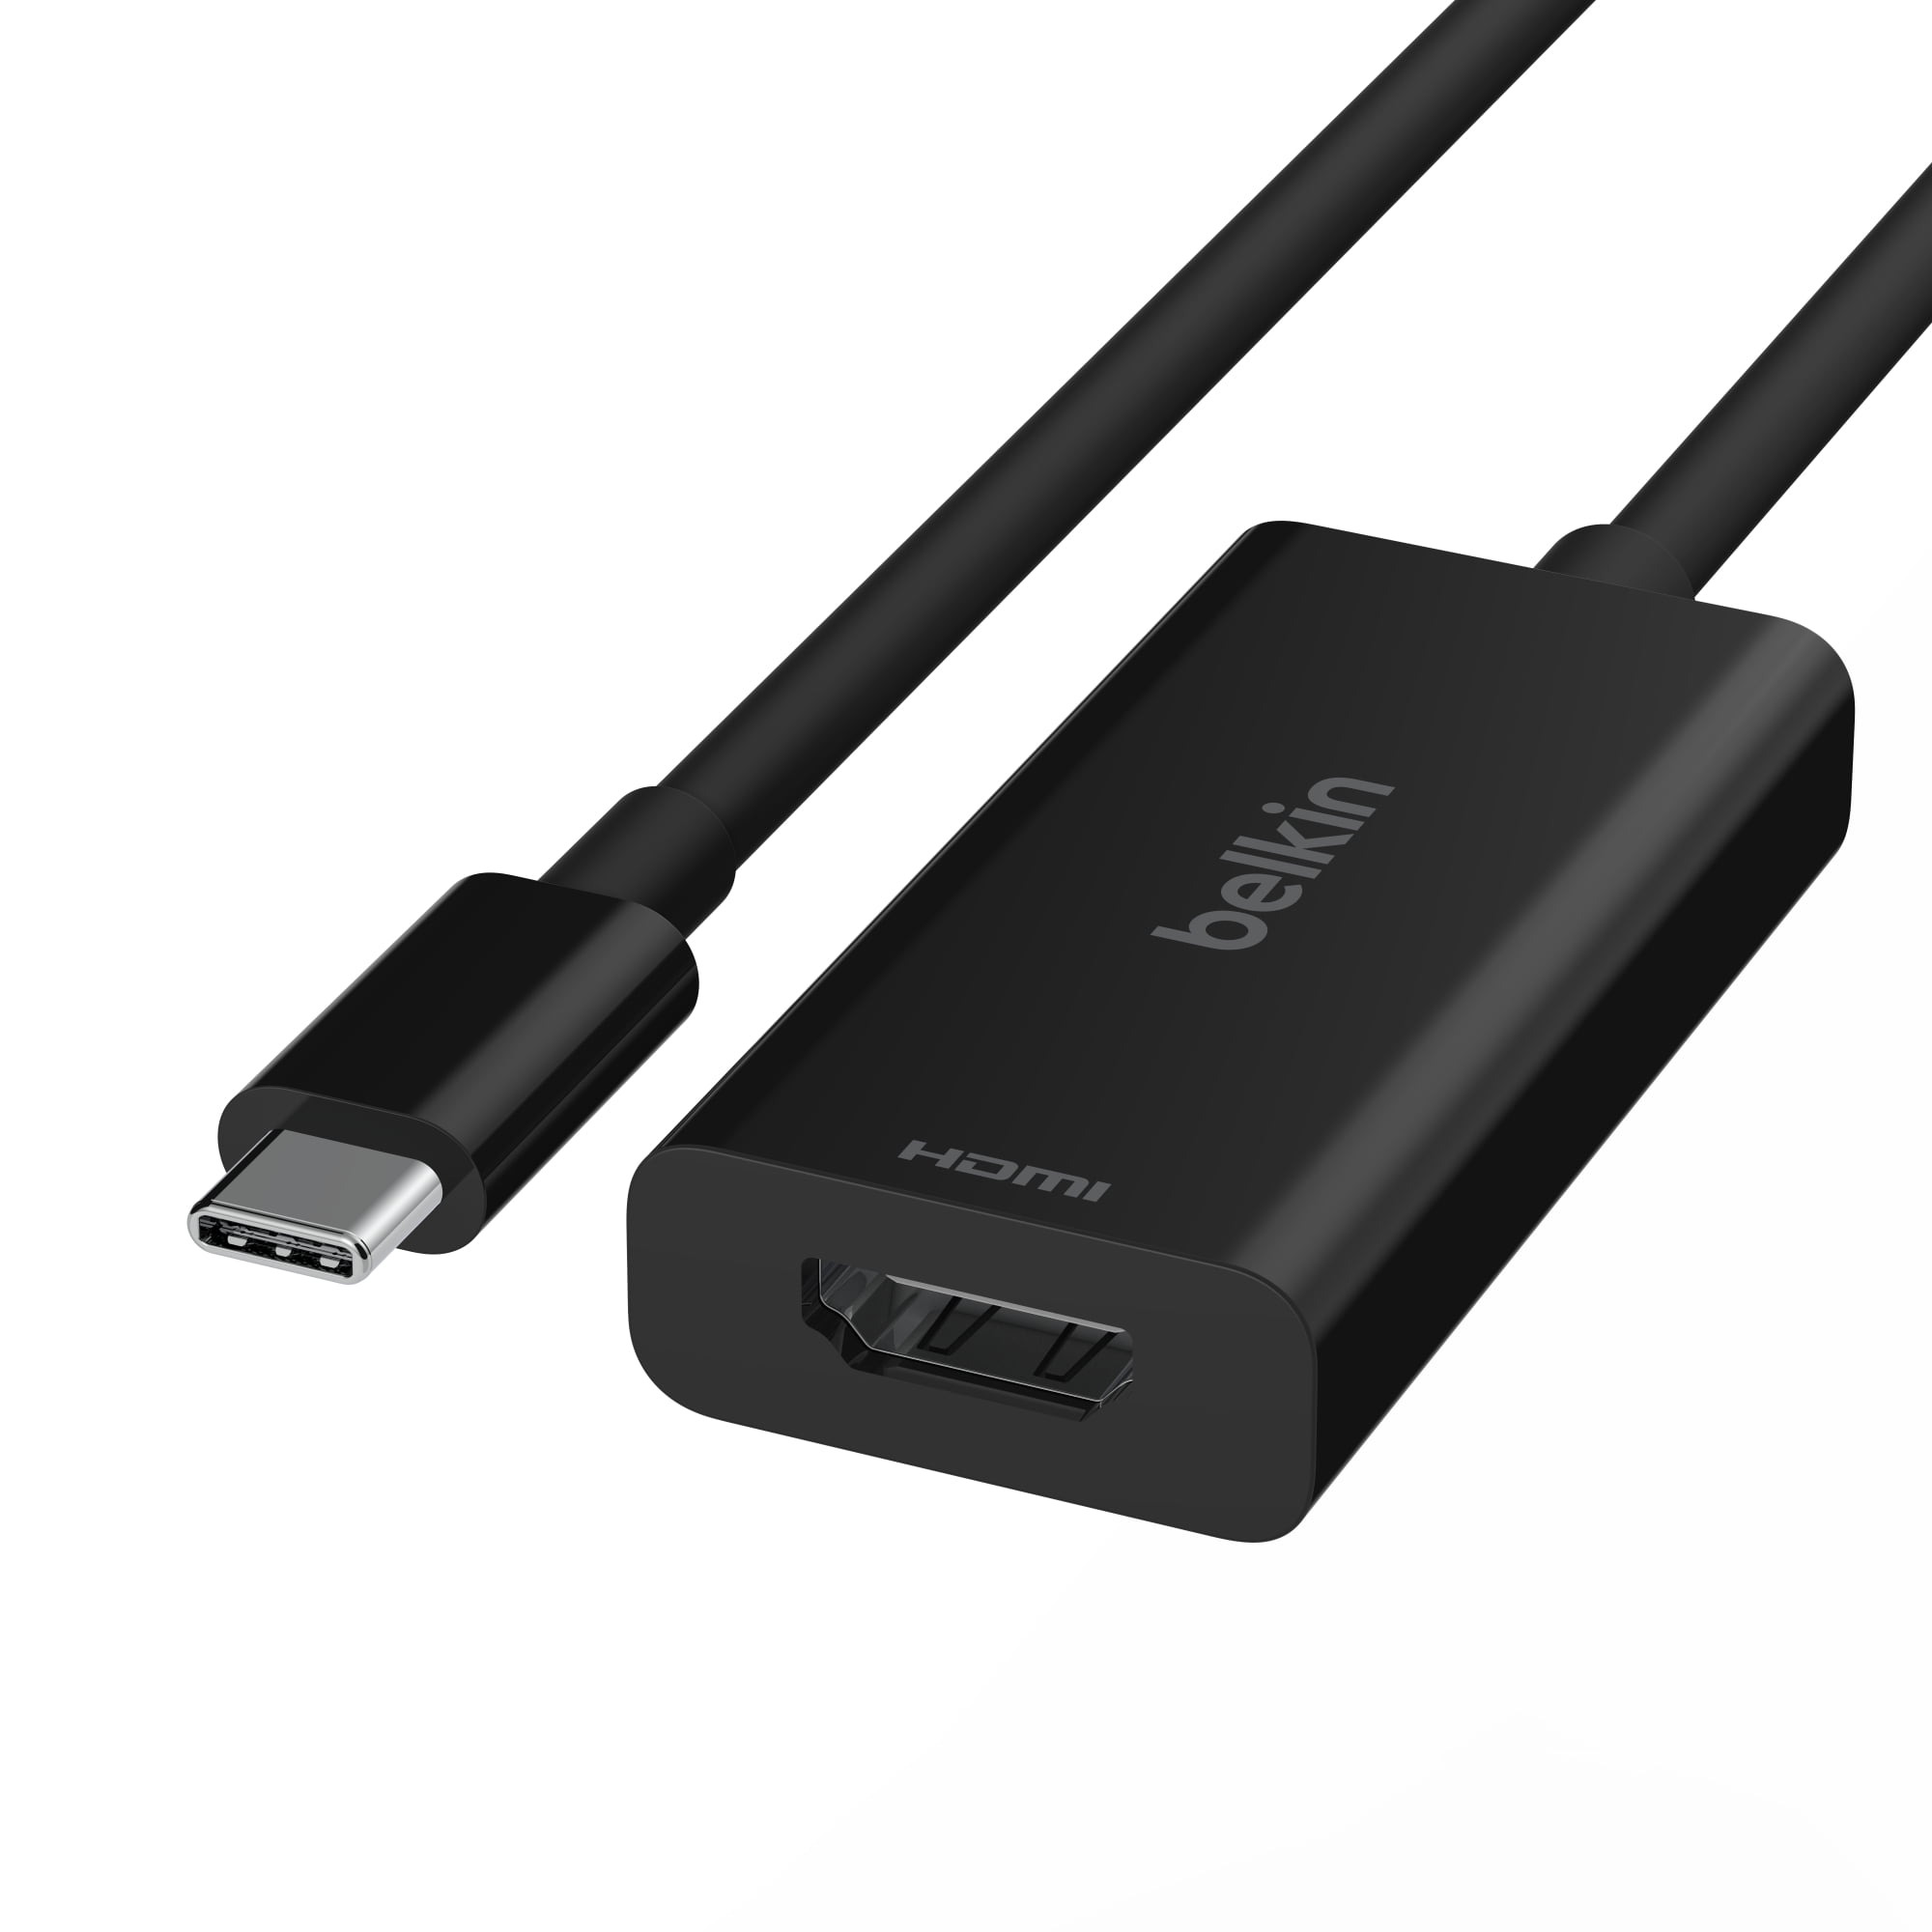 Buy Belkin USB-C to HDMI Adapter (Also known as Type-C)